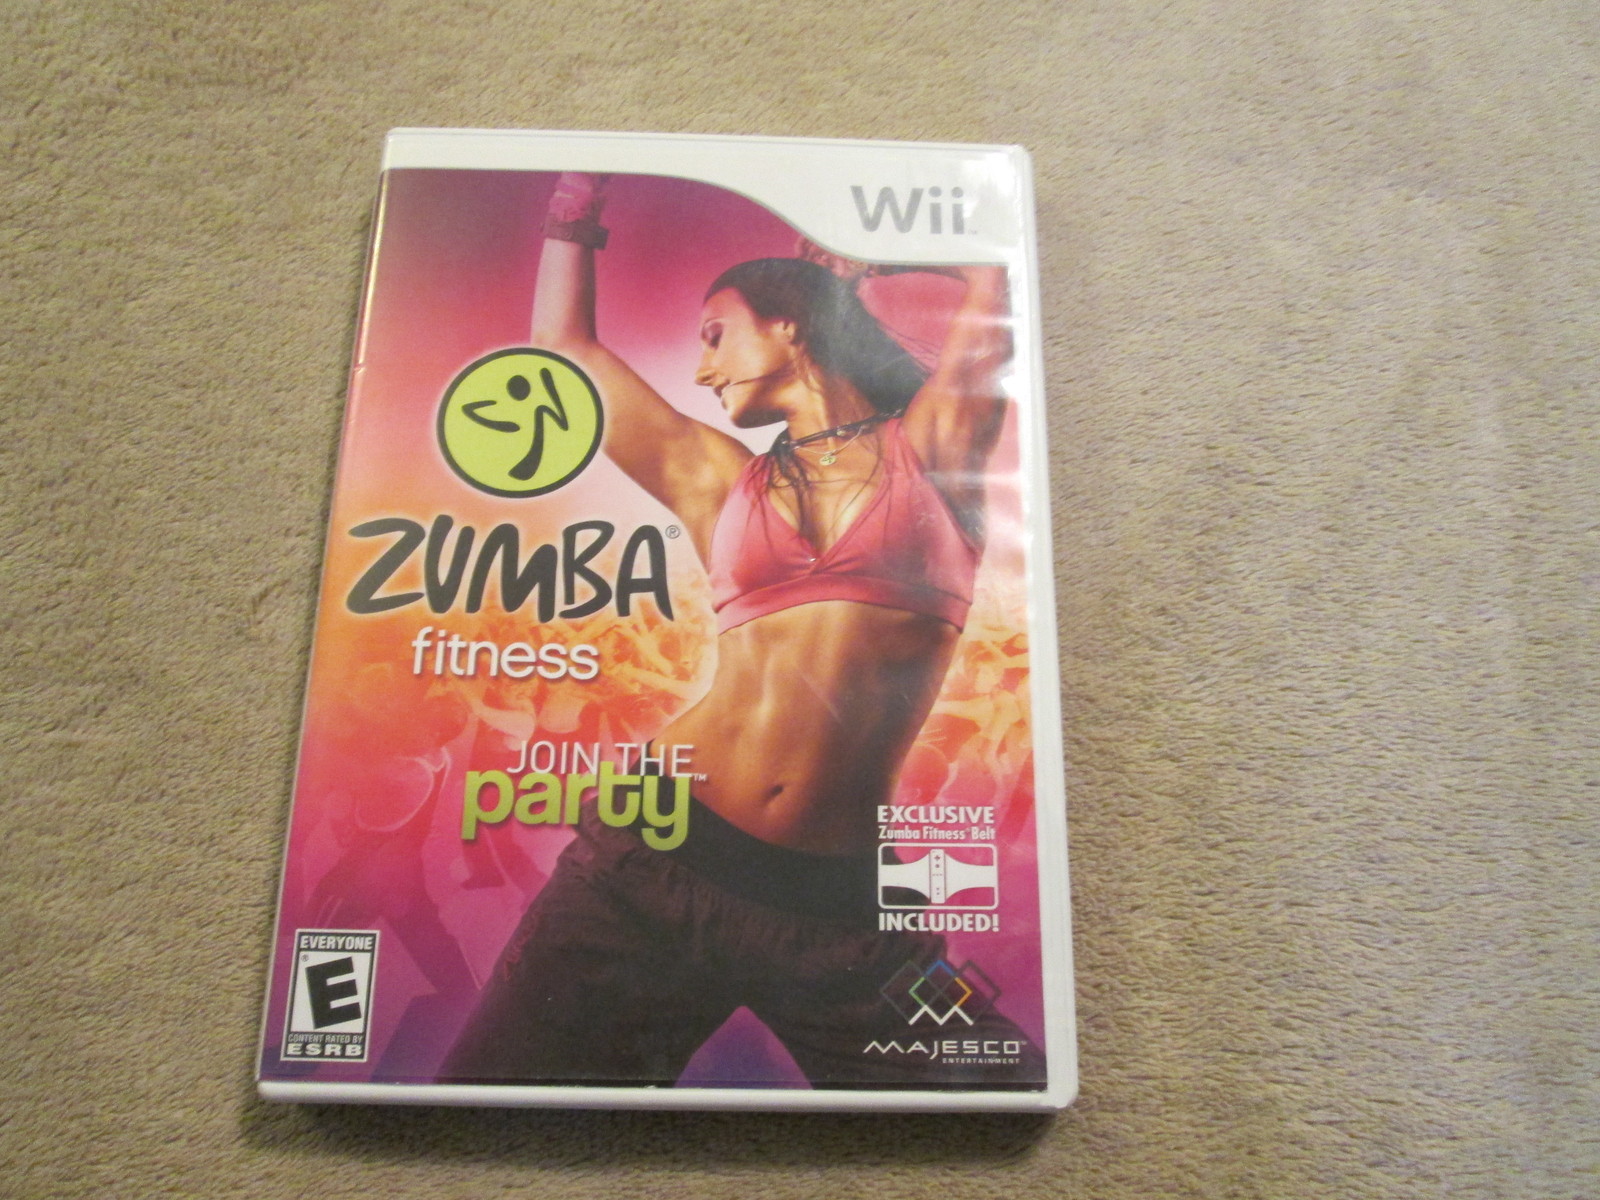 Primary image for Zumba Fitness wii